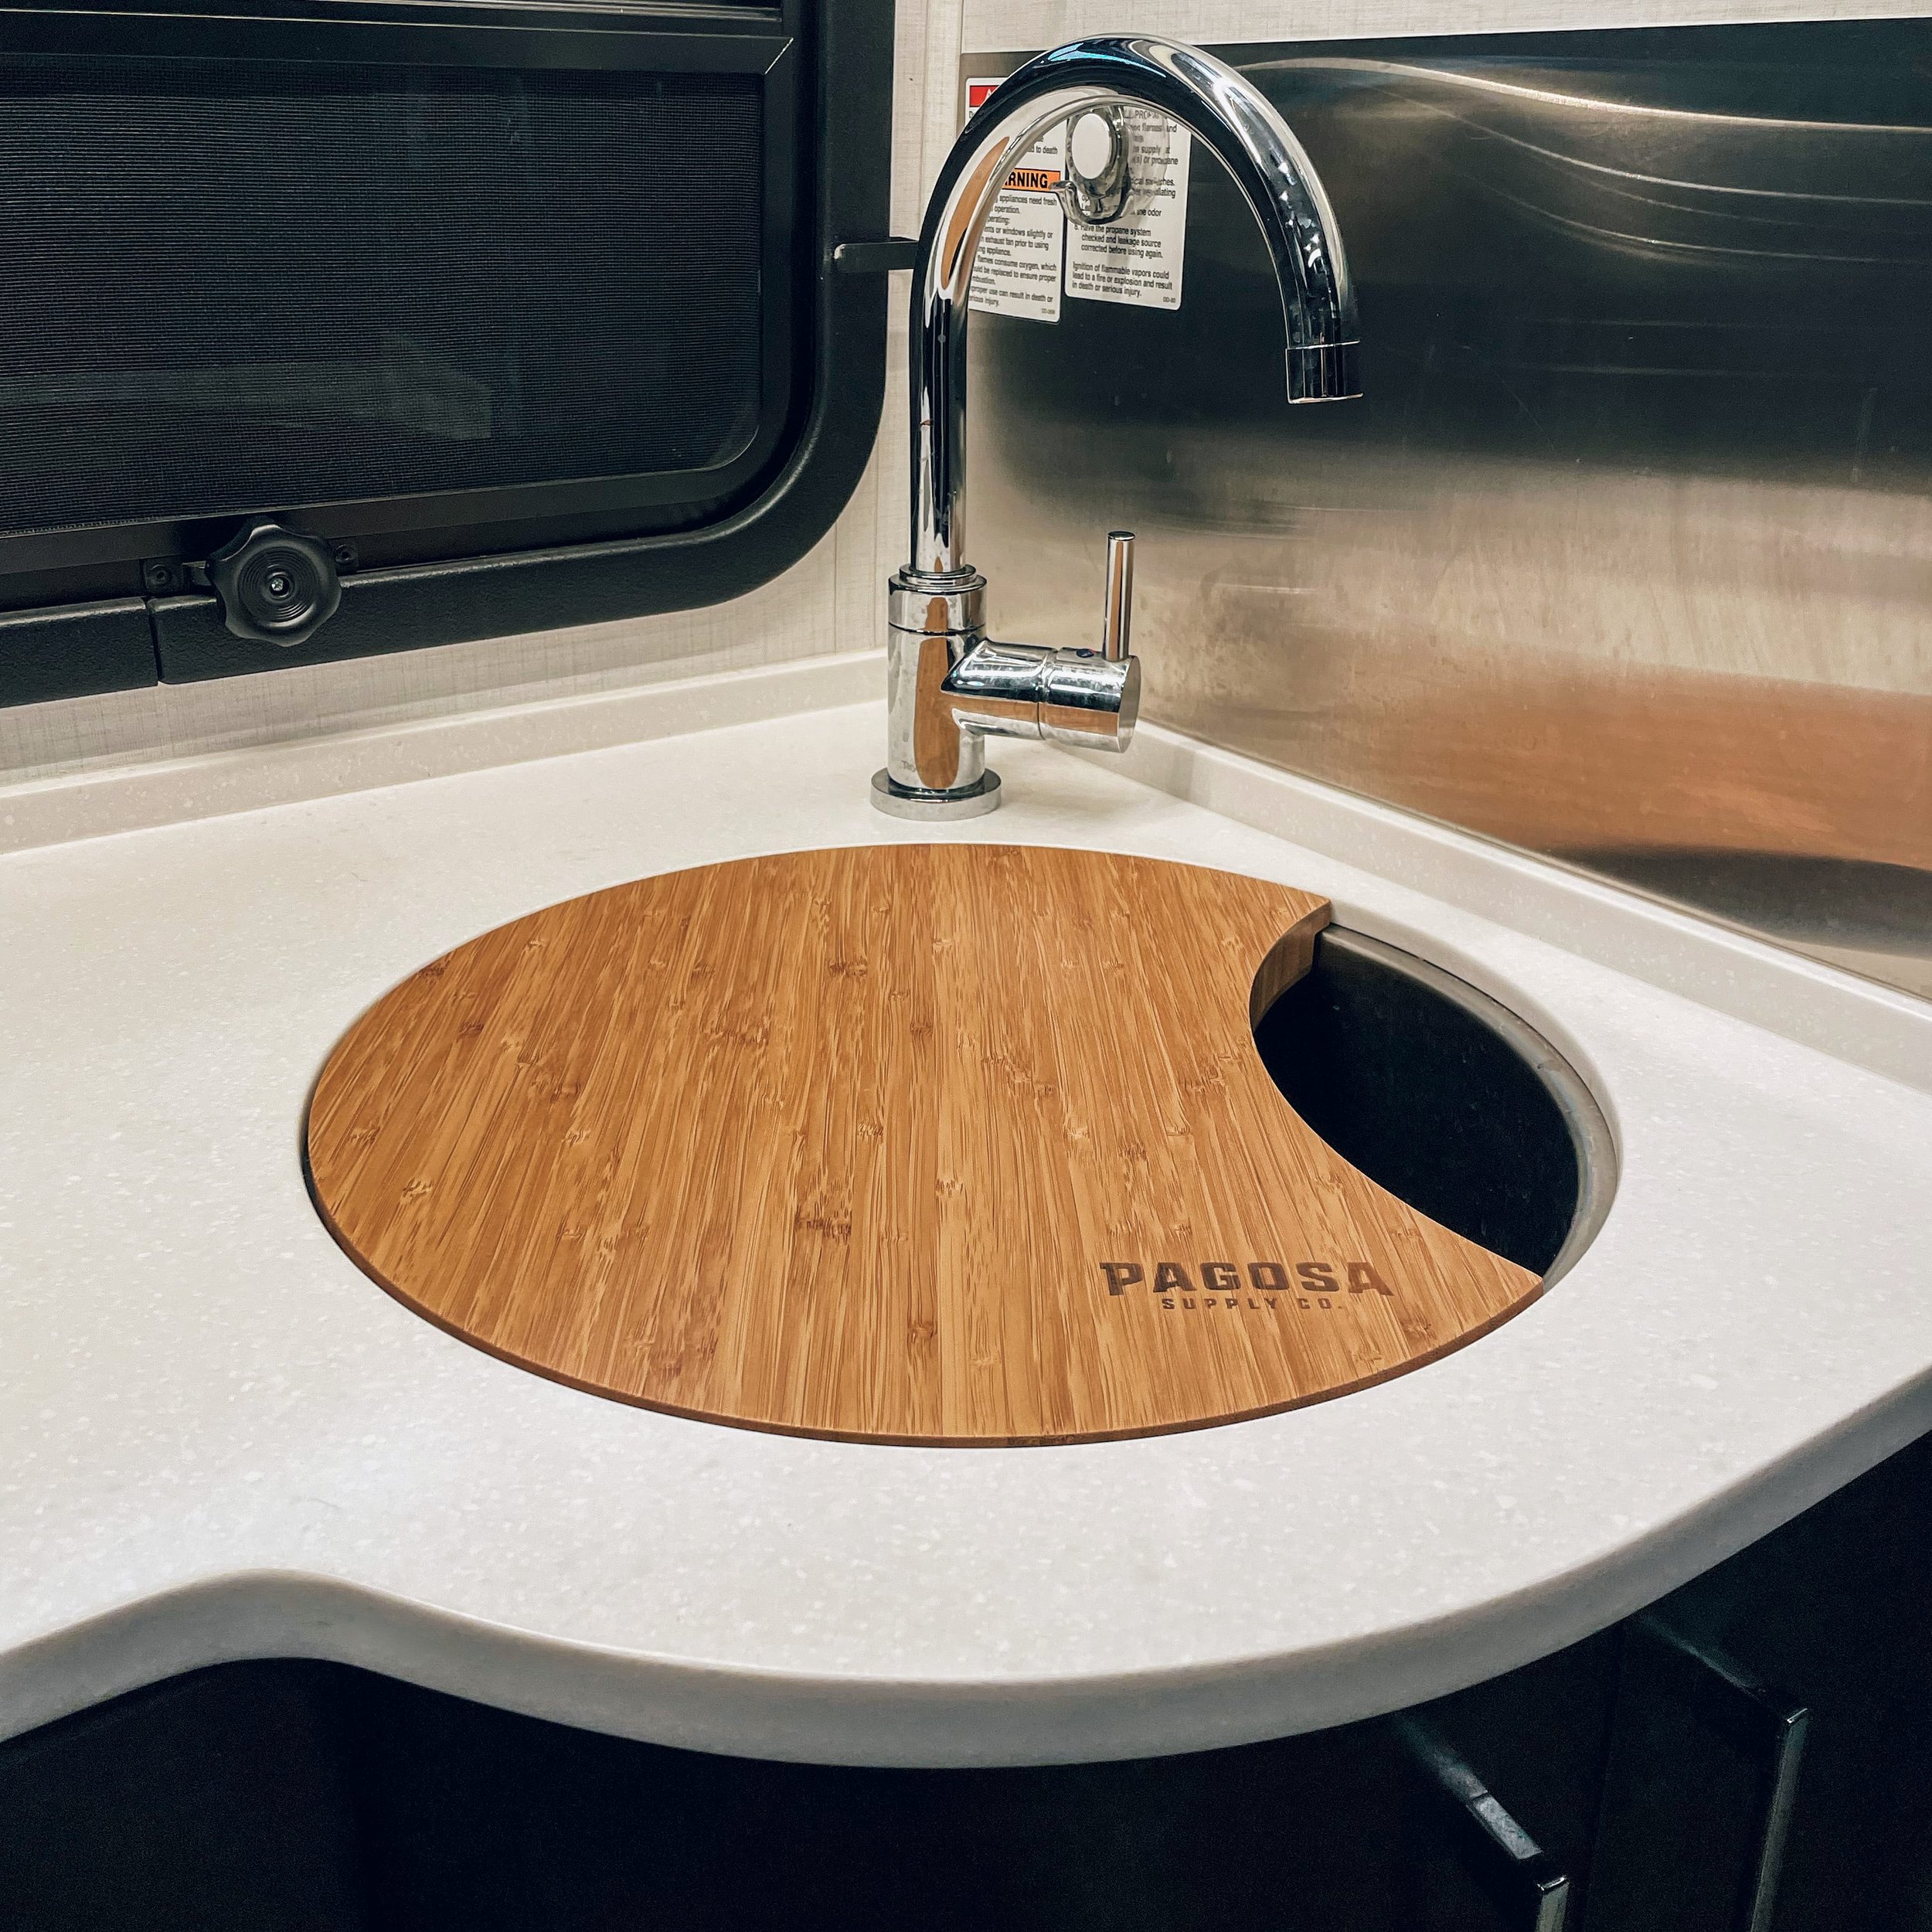 Bamboo Cutting Board / Sink Cover for Leisure Travel Vans